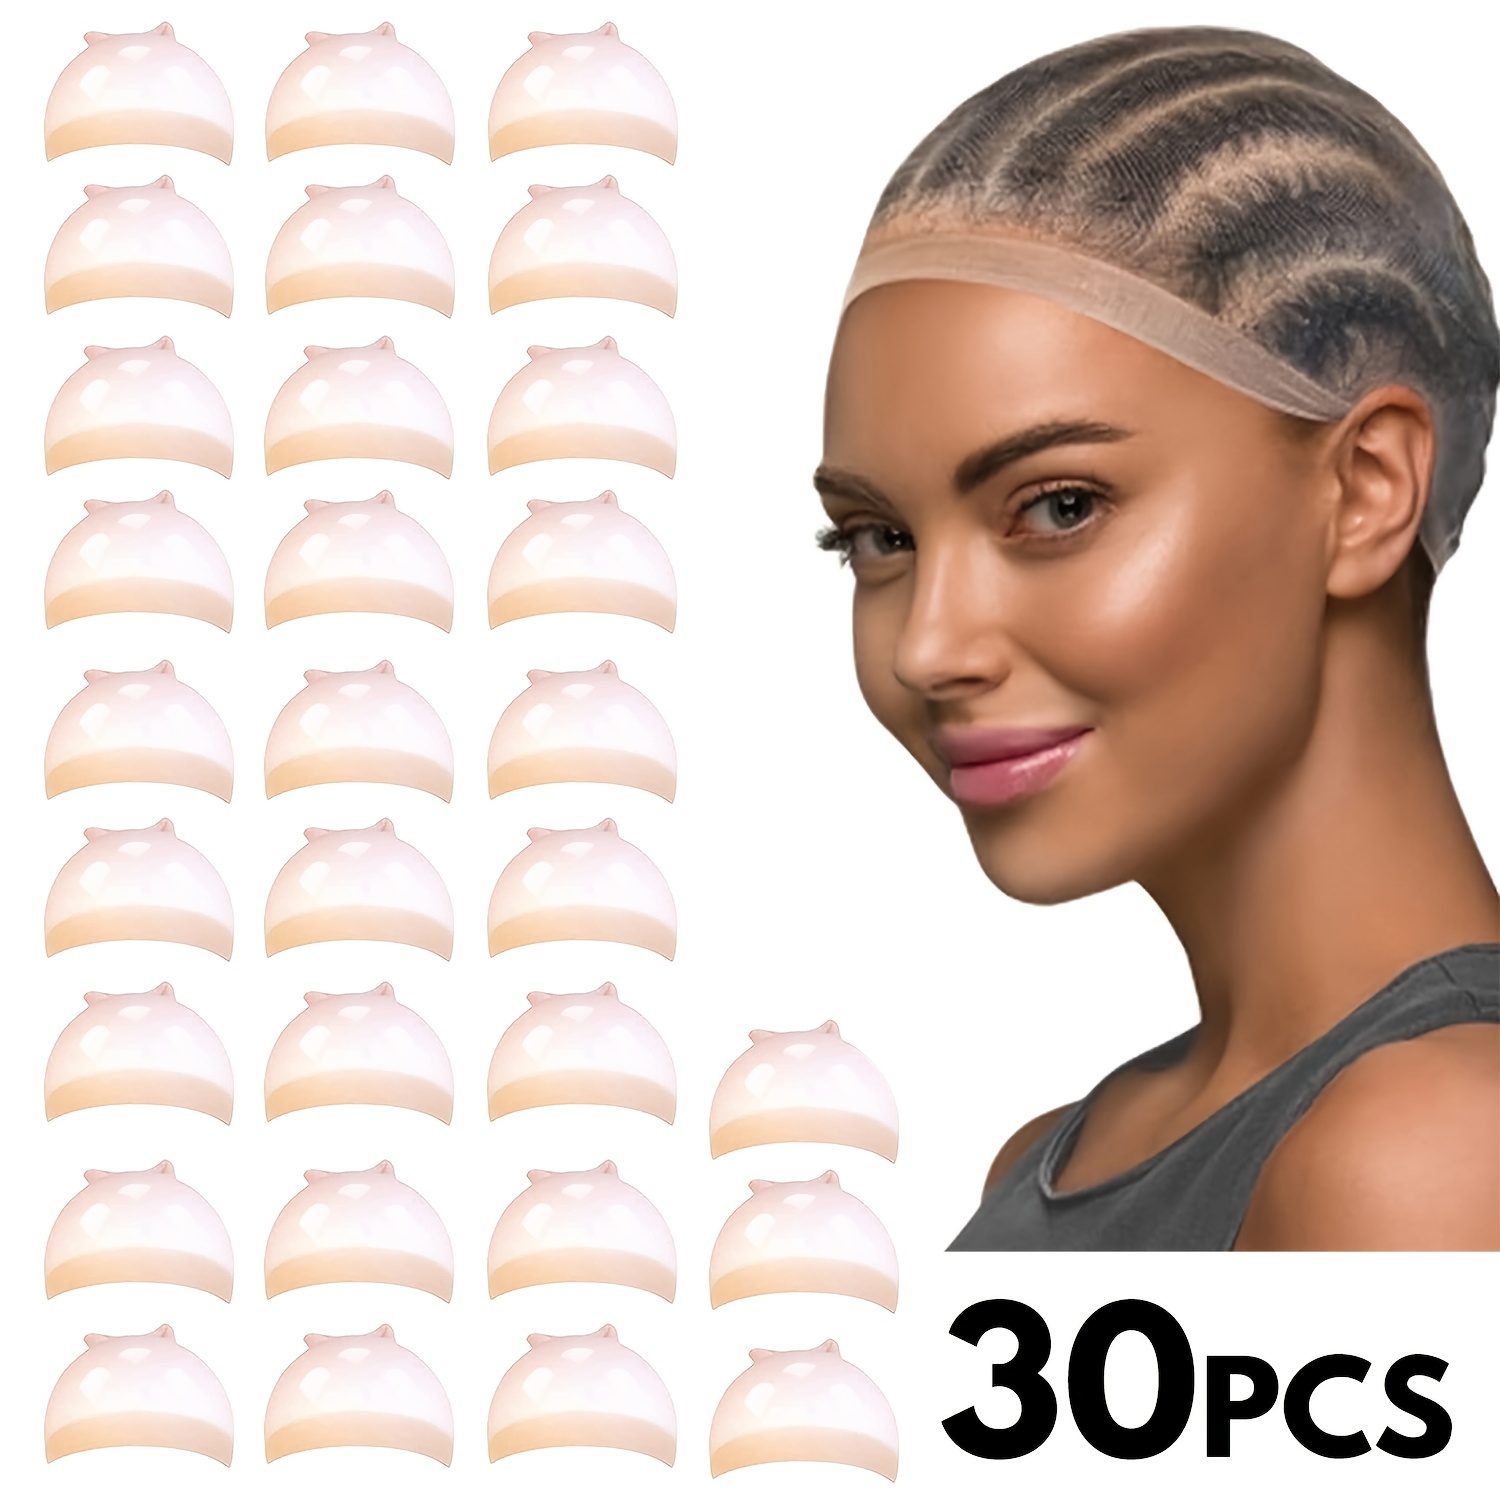 Wig Installation Kit For Lace Front Wigs Everything To Lay A Wig